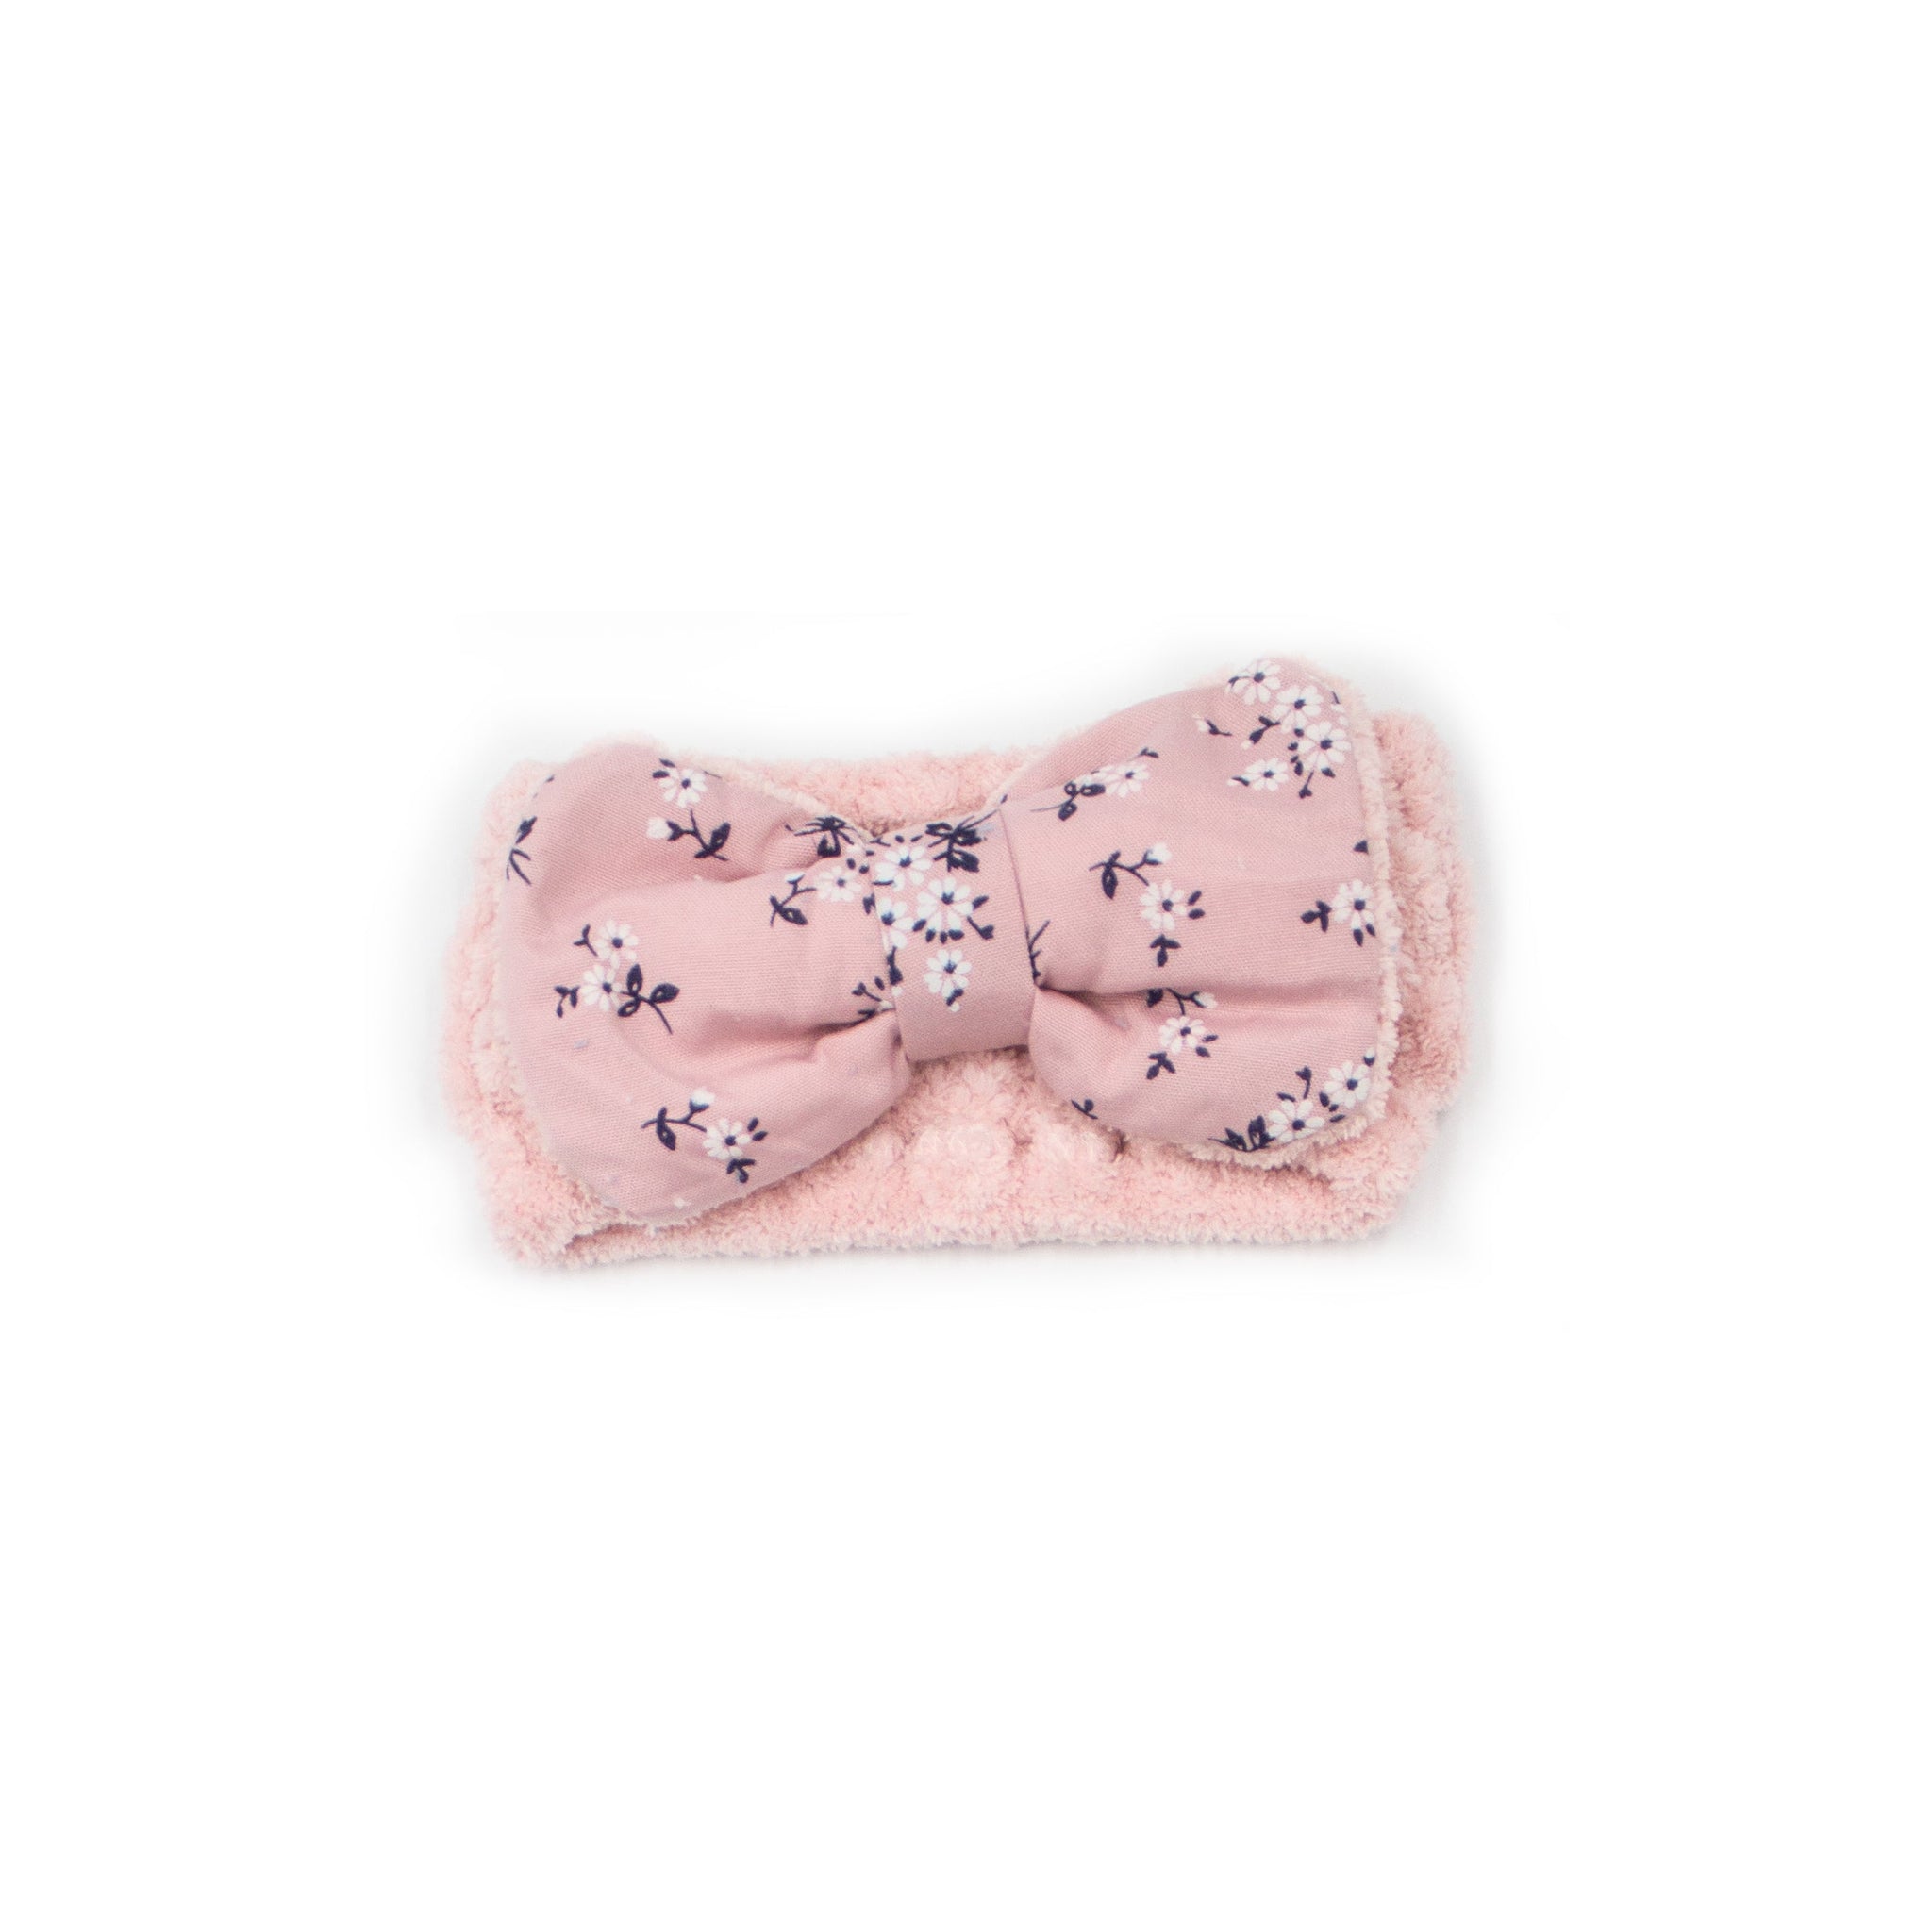 Cosmetic Makeup Headband With "Flower" Print Gingham Style Bow